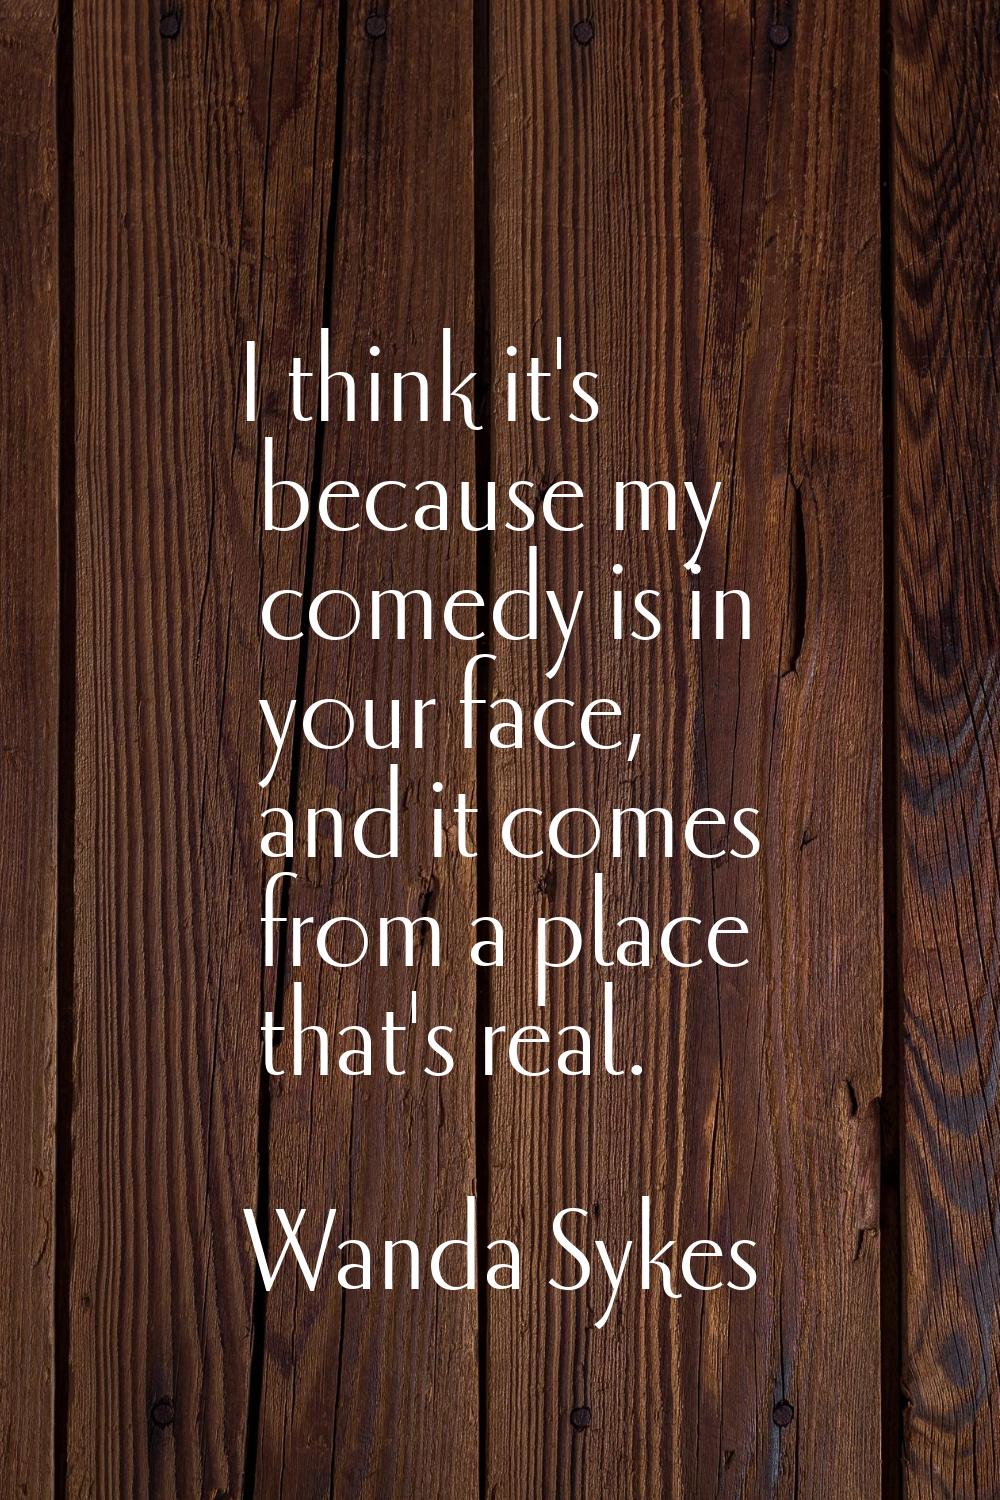 I think it's because my comedy is in your face, and it comes from a place that's real.